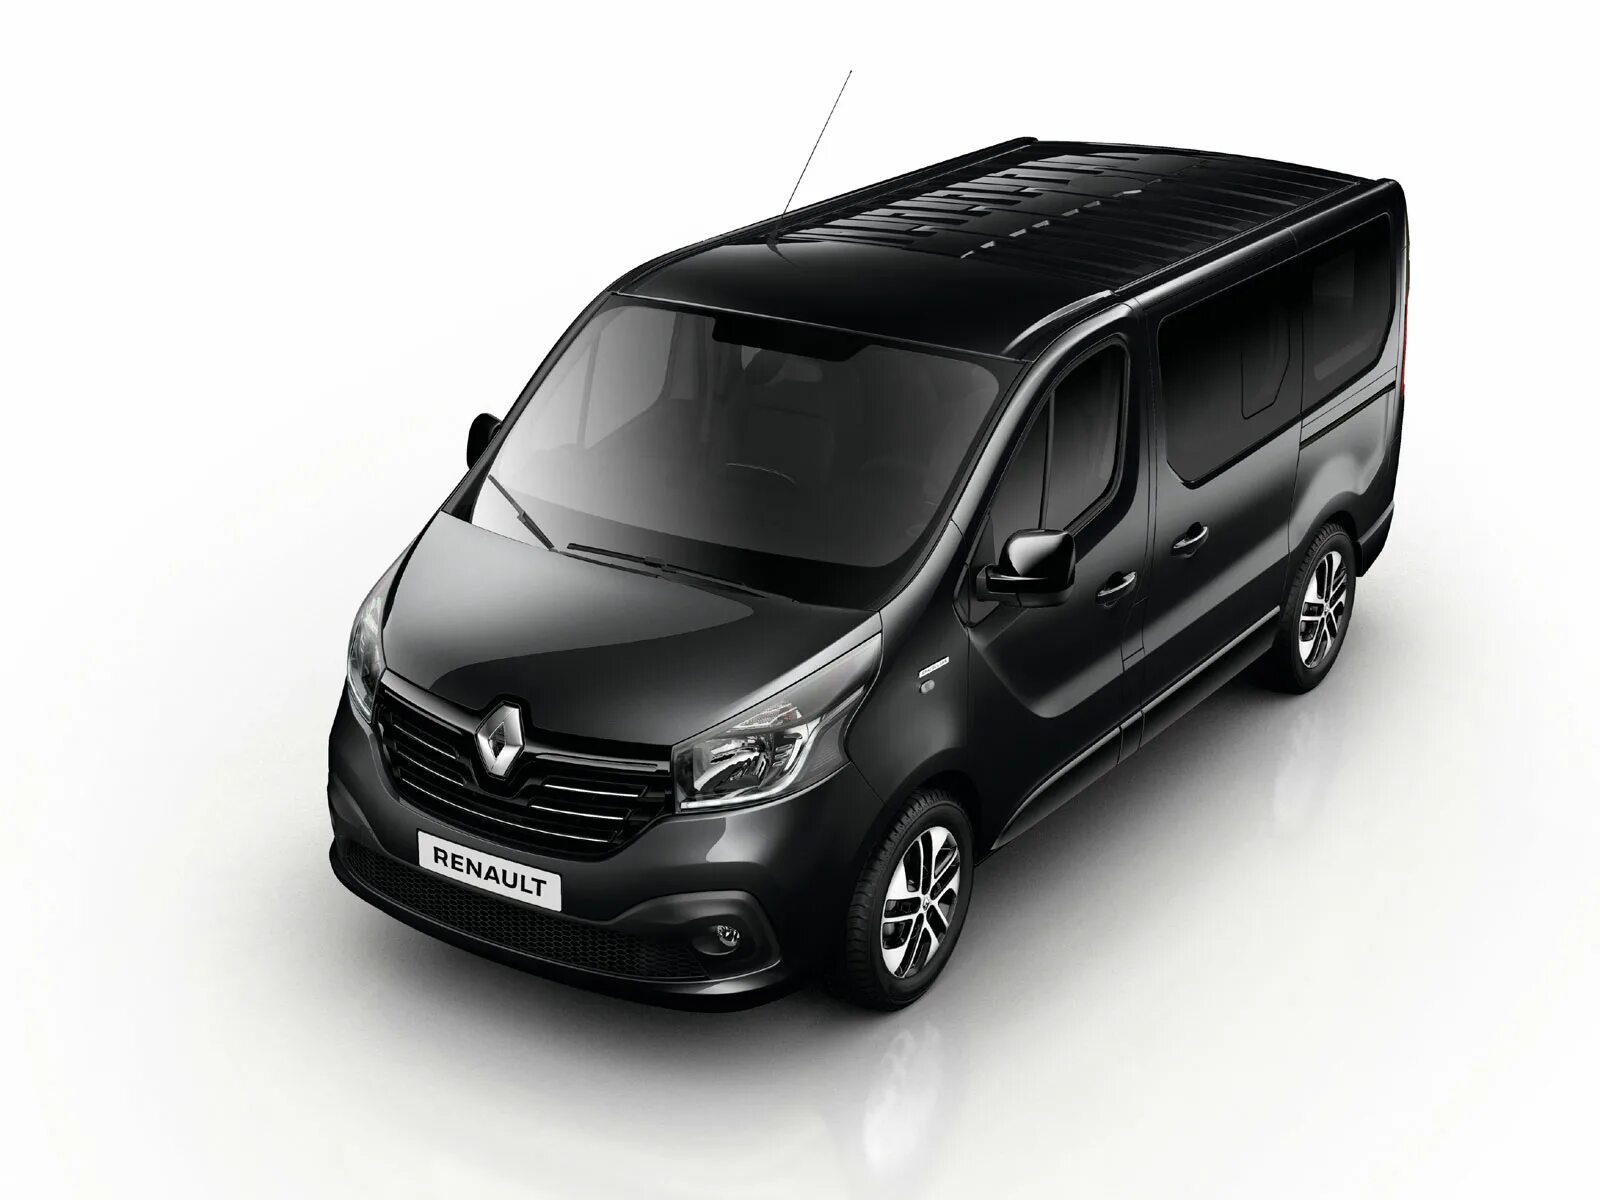 Renault Trafic SPACECLASS. Рено трафик 2. Рено трафик 2014. Рено трафик 2016.